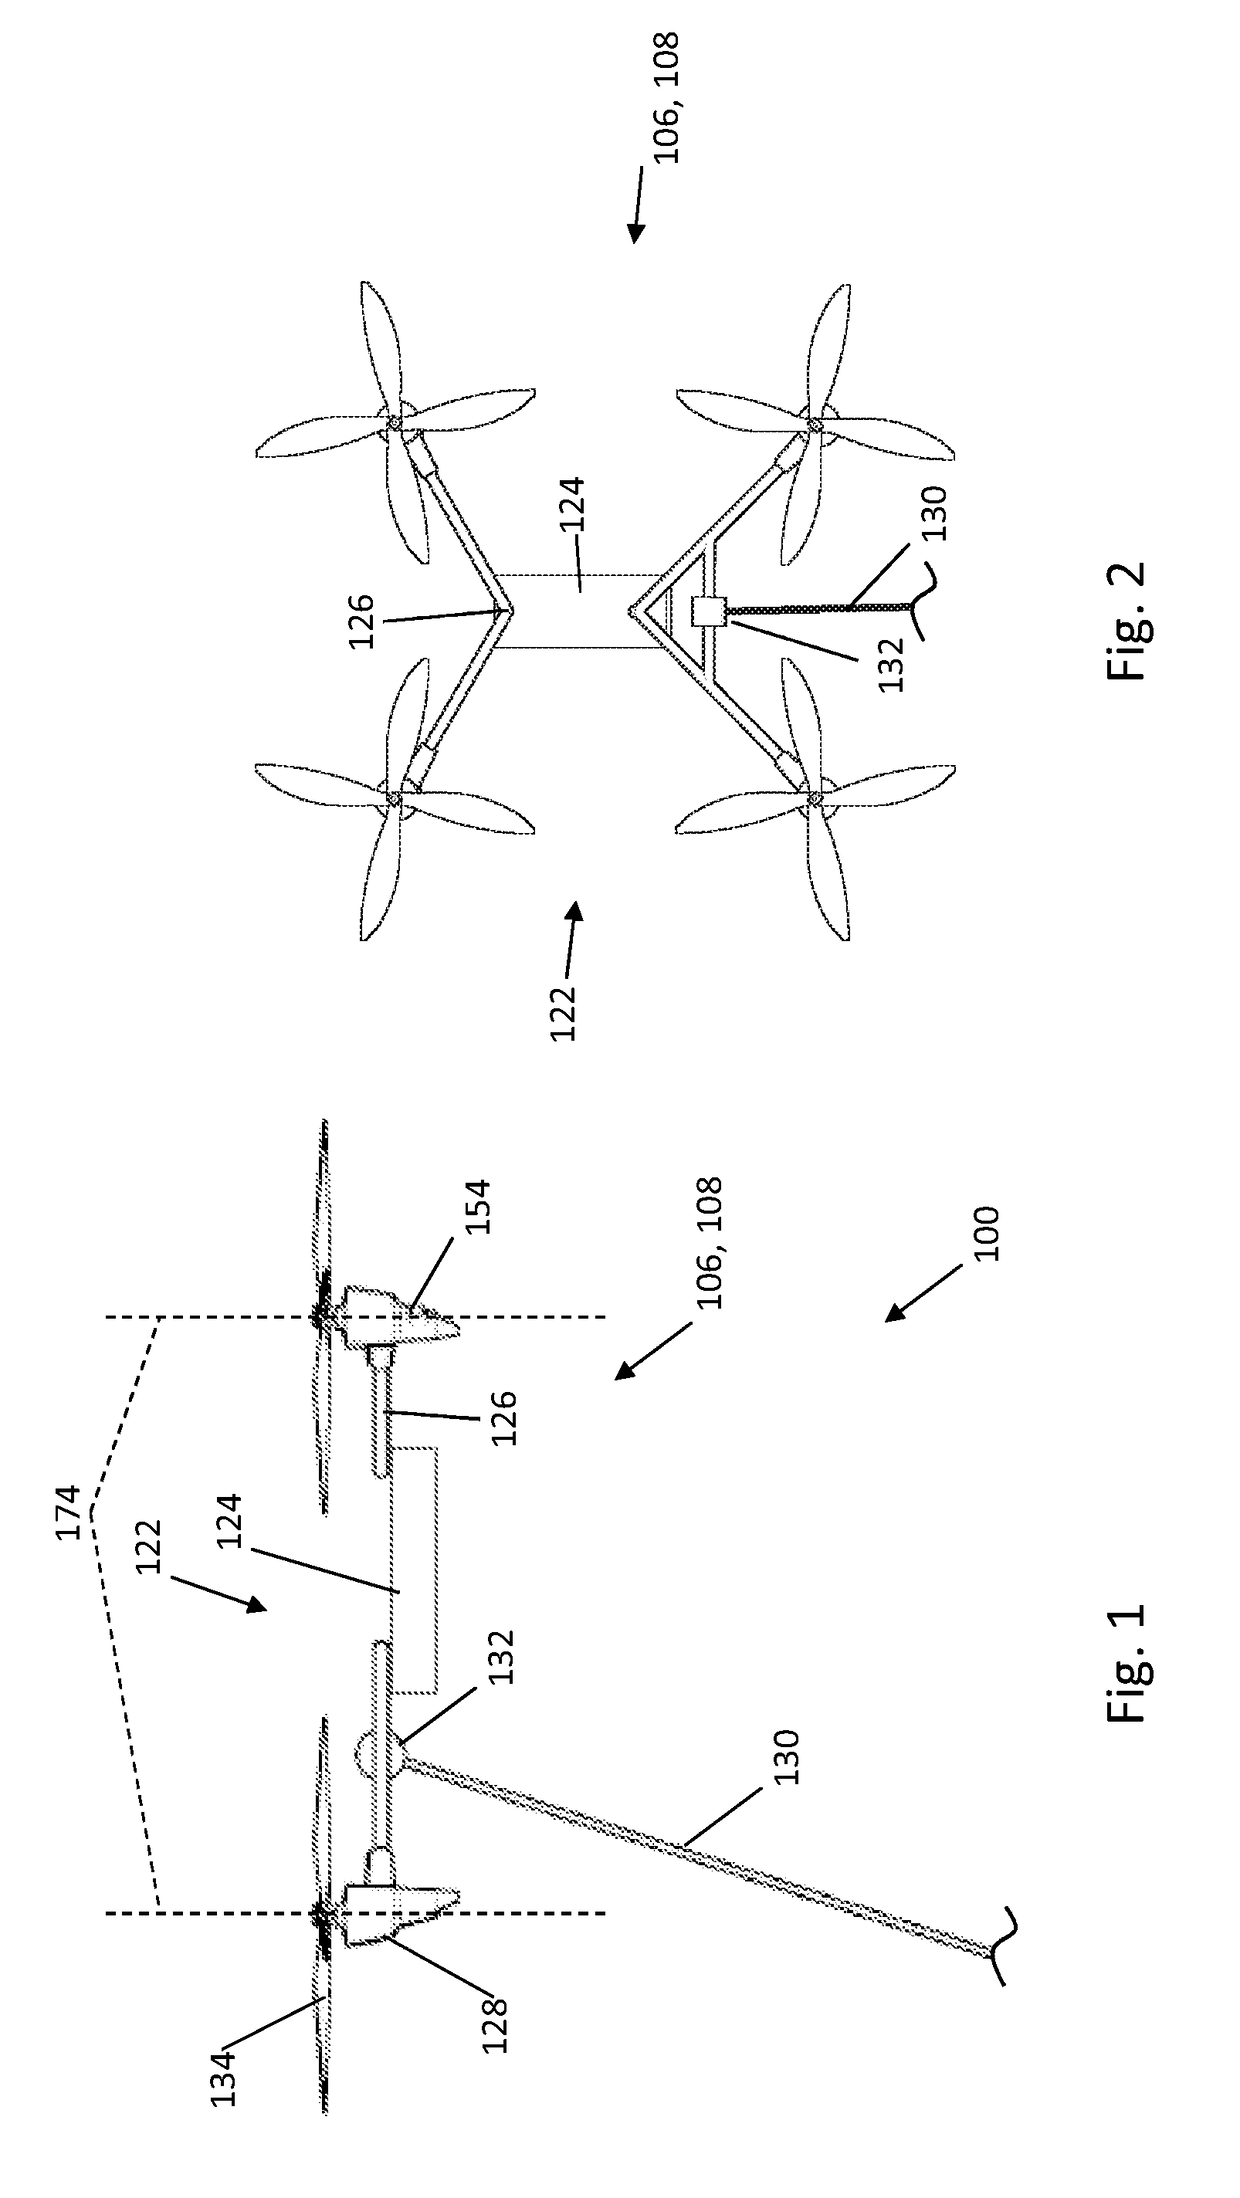 Aerial vehicle system